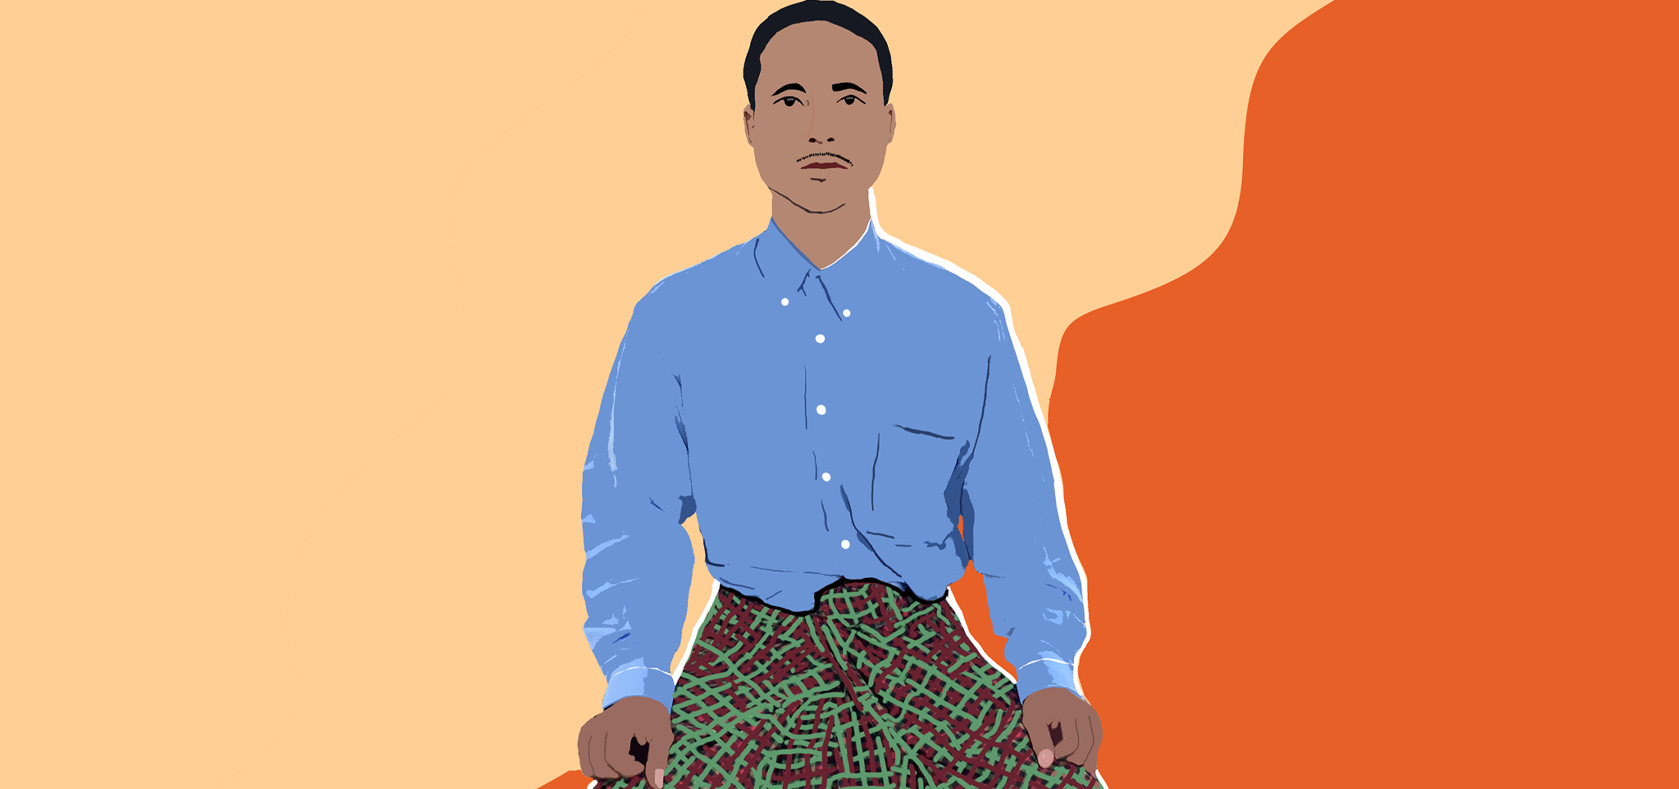 Ko Aung Lin, a father of three boys, knows exactly what violence against women is because he has committed it himself. Illustration of Ko Aung Lin by UN Women/Lesly Lotha based on a photo by UN Women/Nan Sanhom